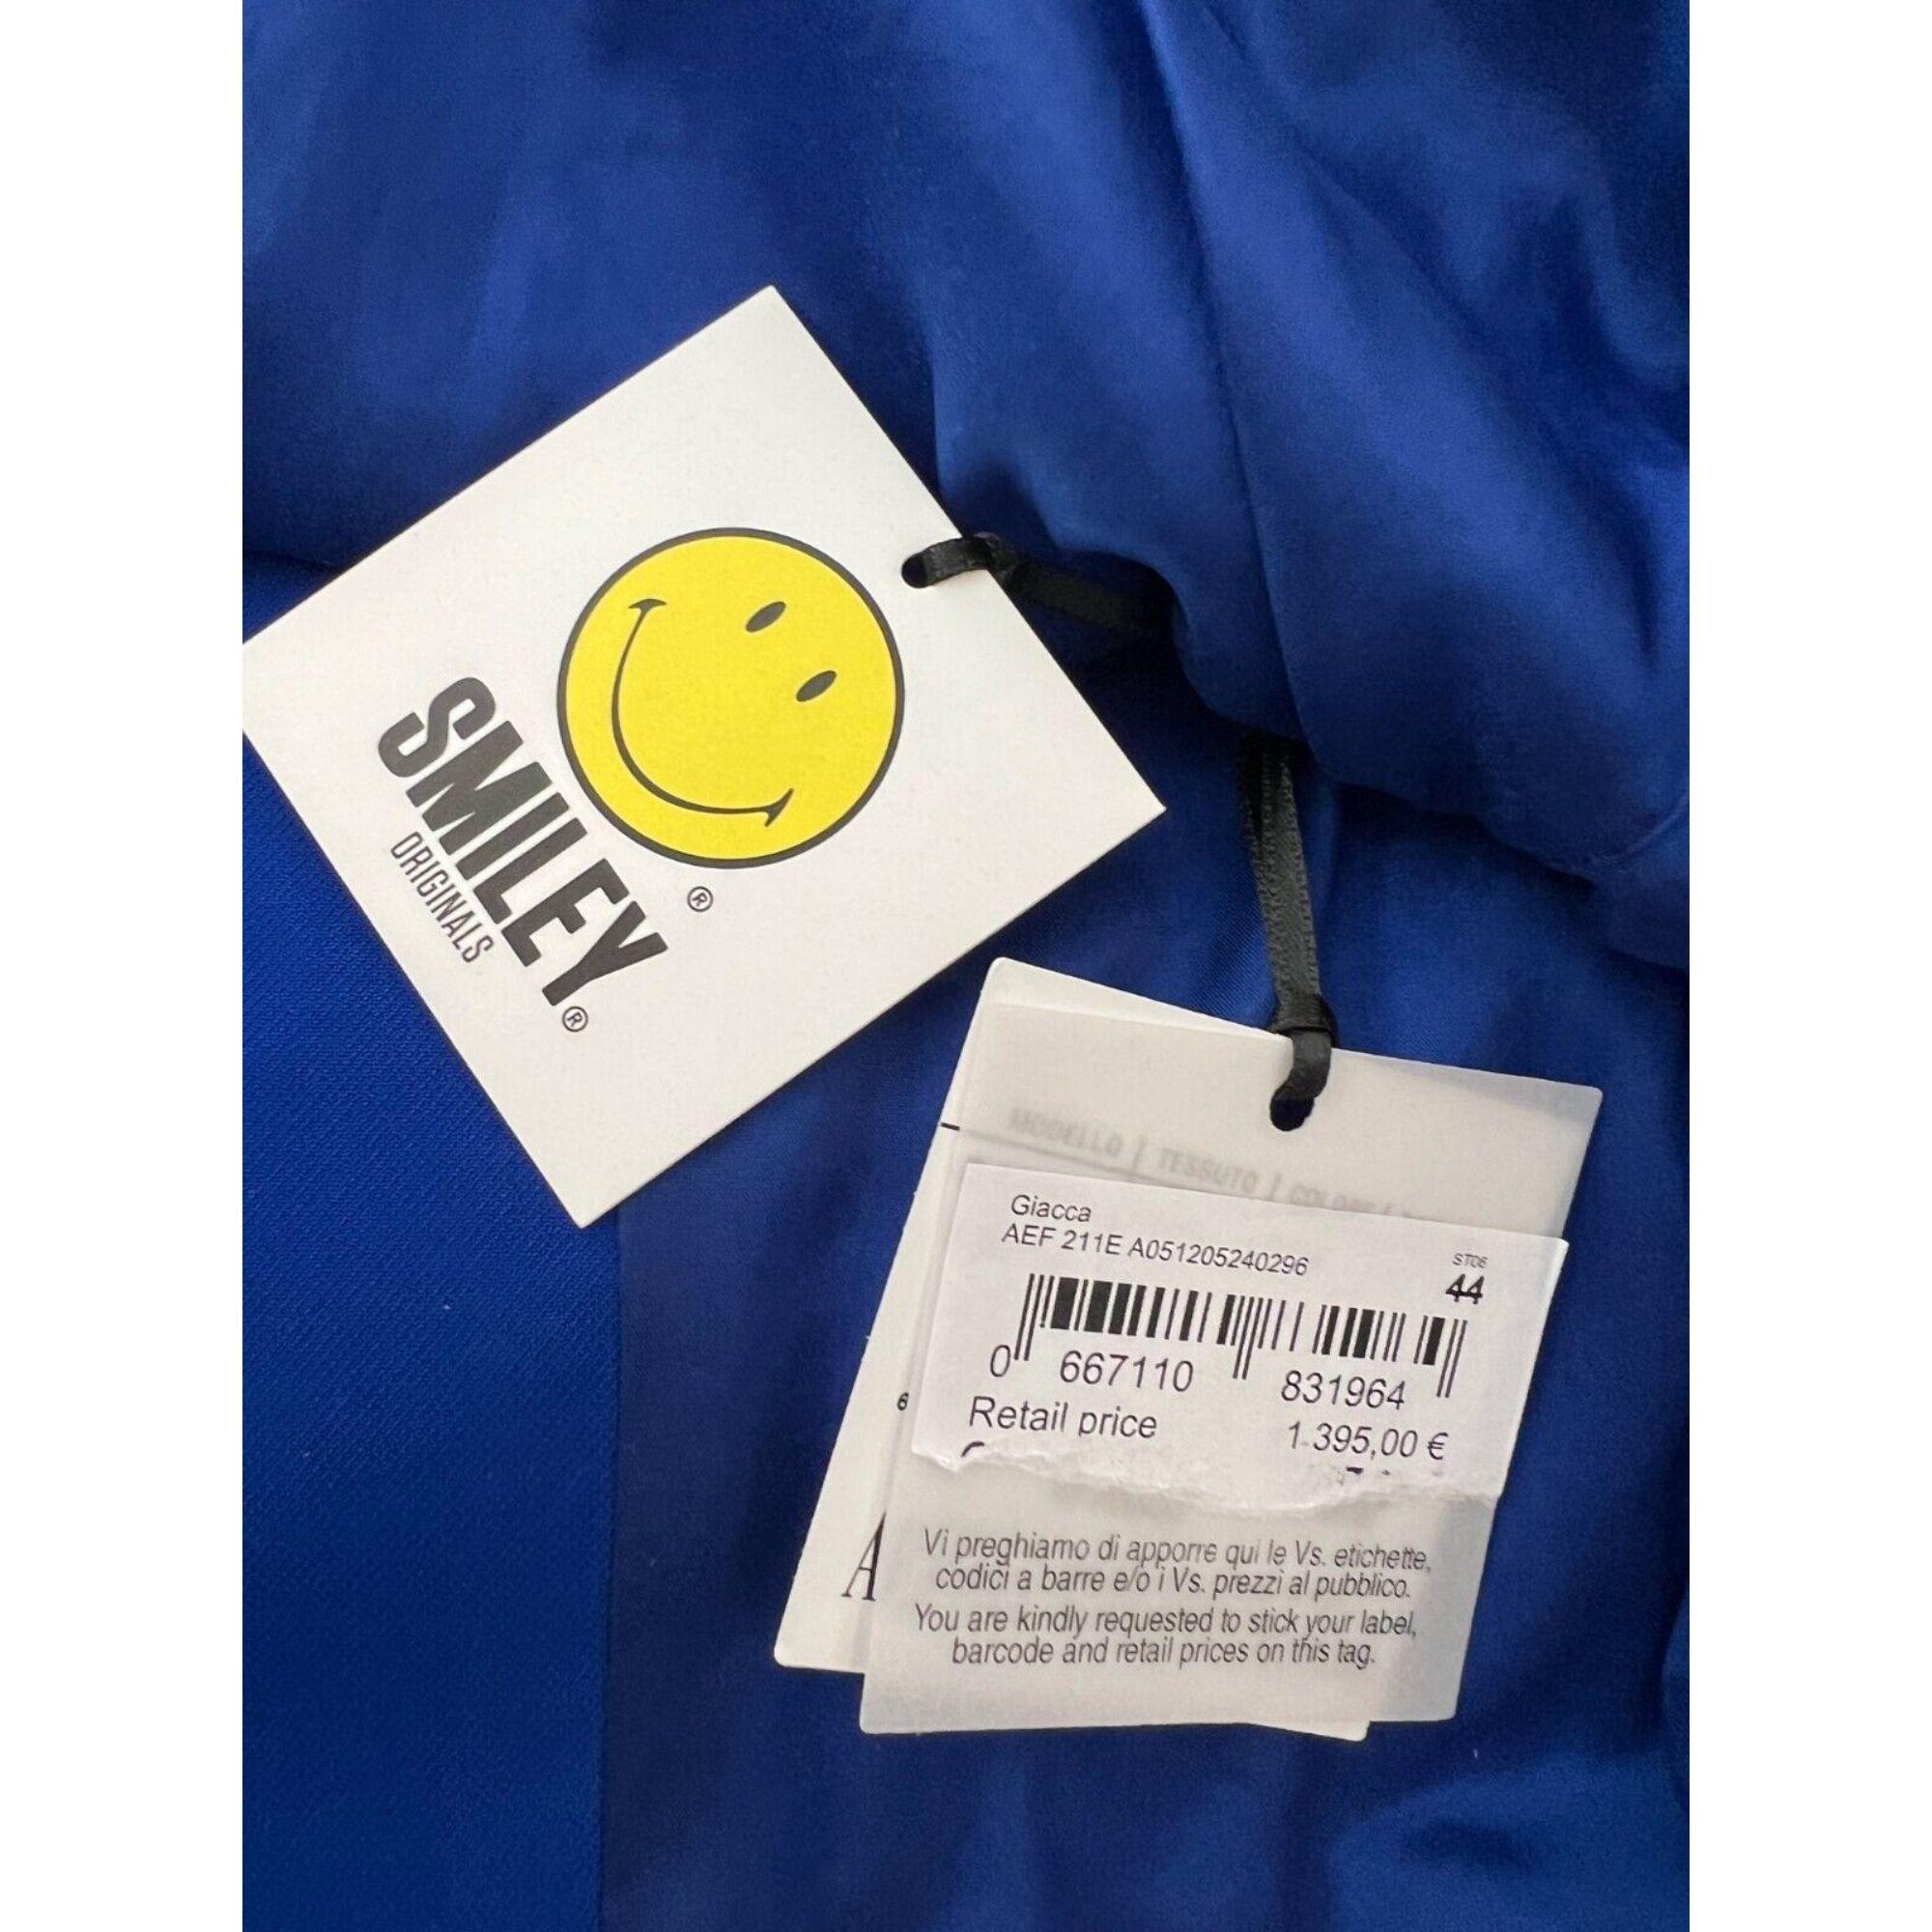 SS21 Moschino Couture BlueBlazer Smiley Face by Jeremy Scott, Size US 12 For Sale 6